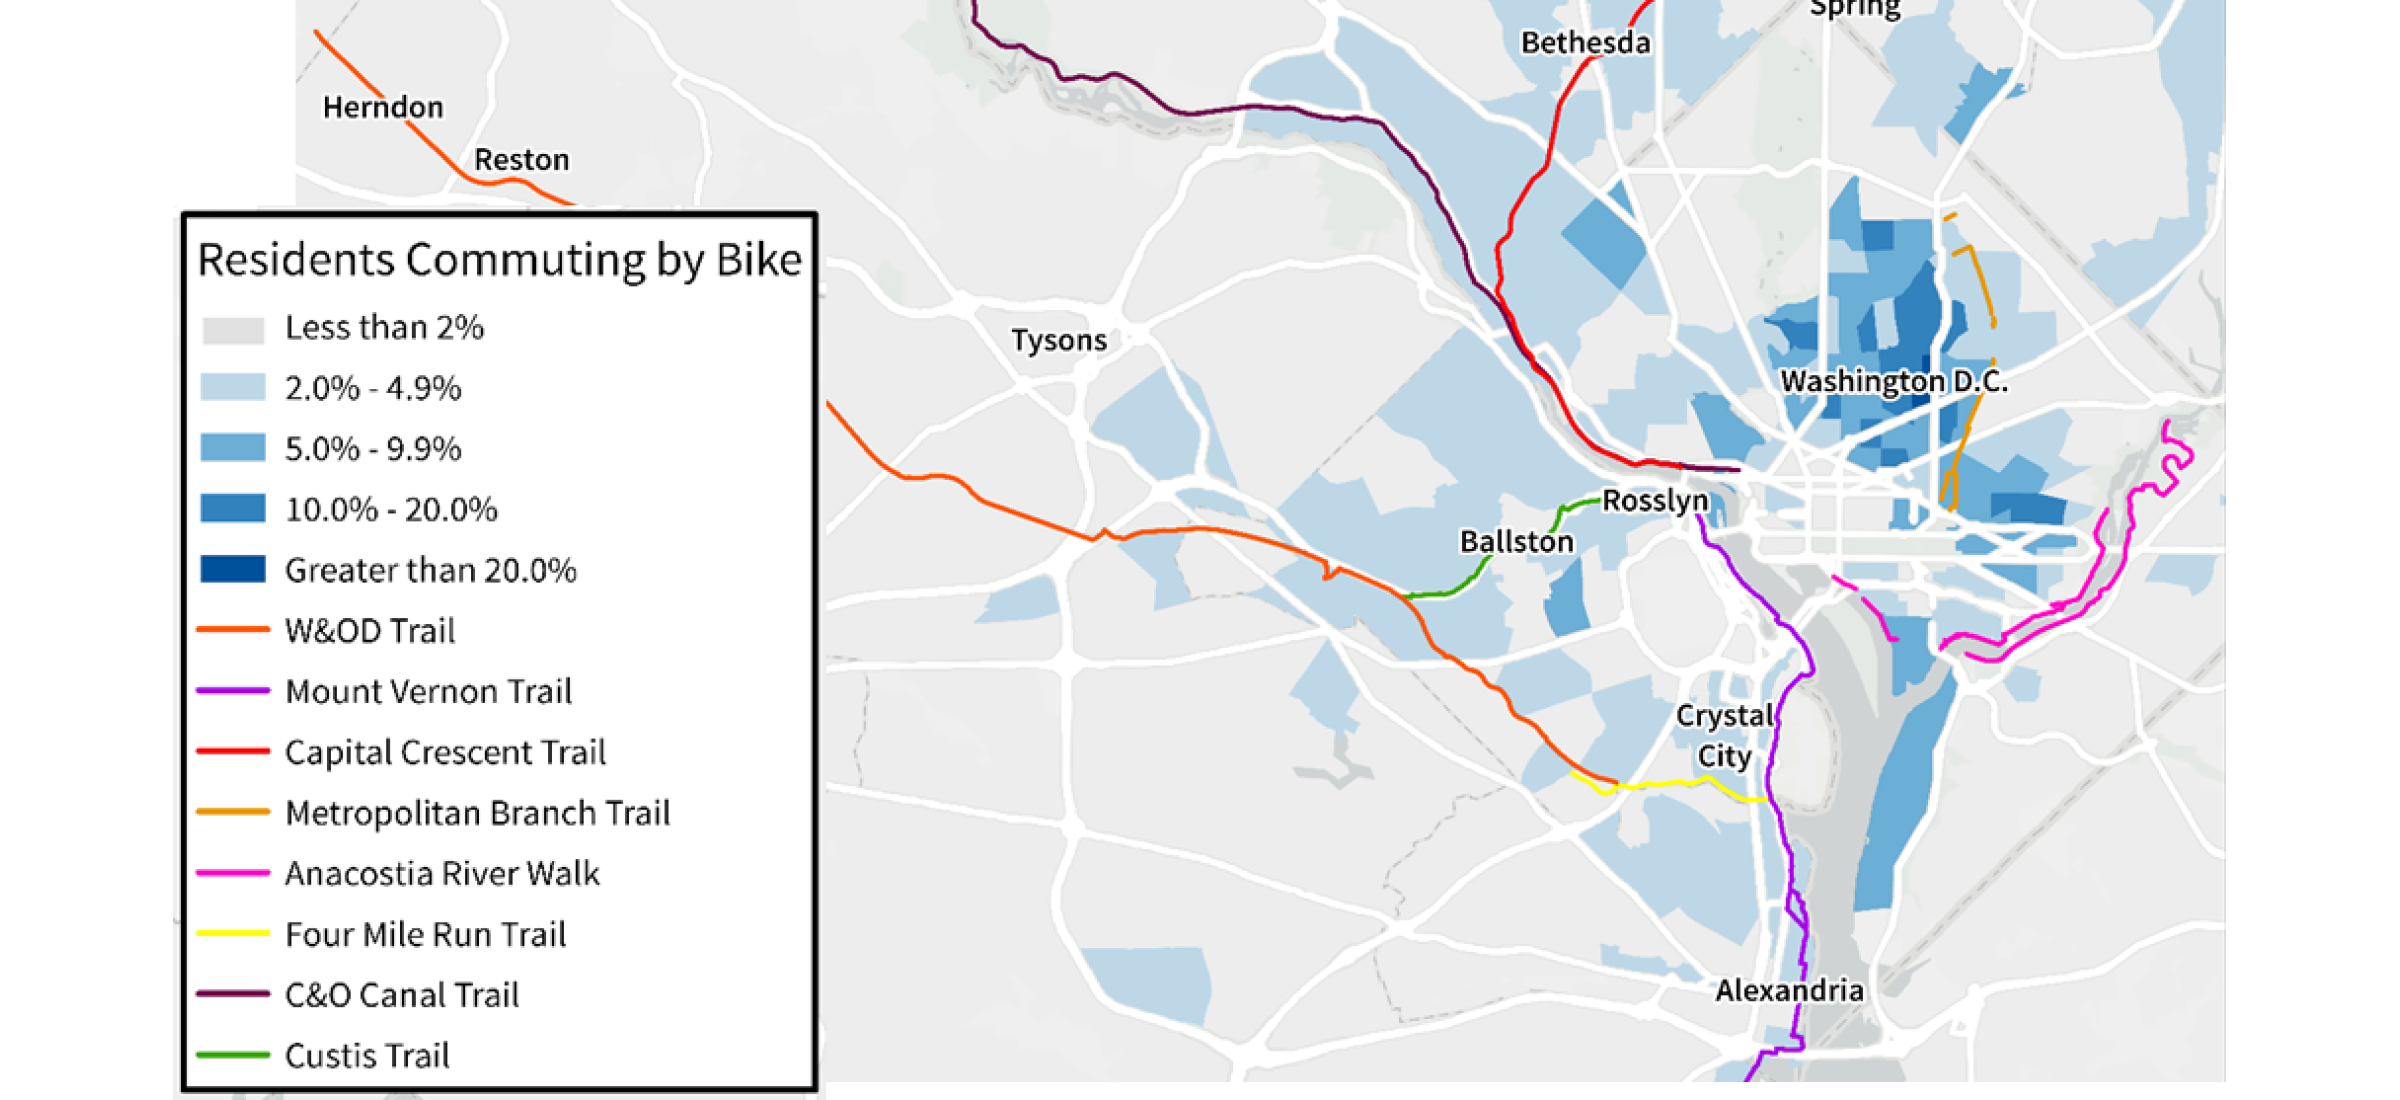 Washington DC biking amenities are in vogue in the suburbs, but where are the commuters?